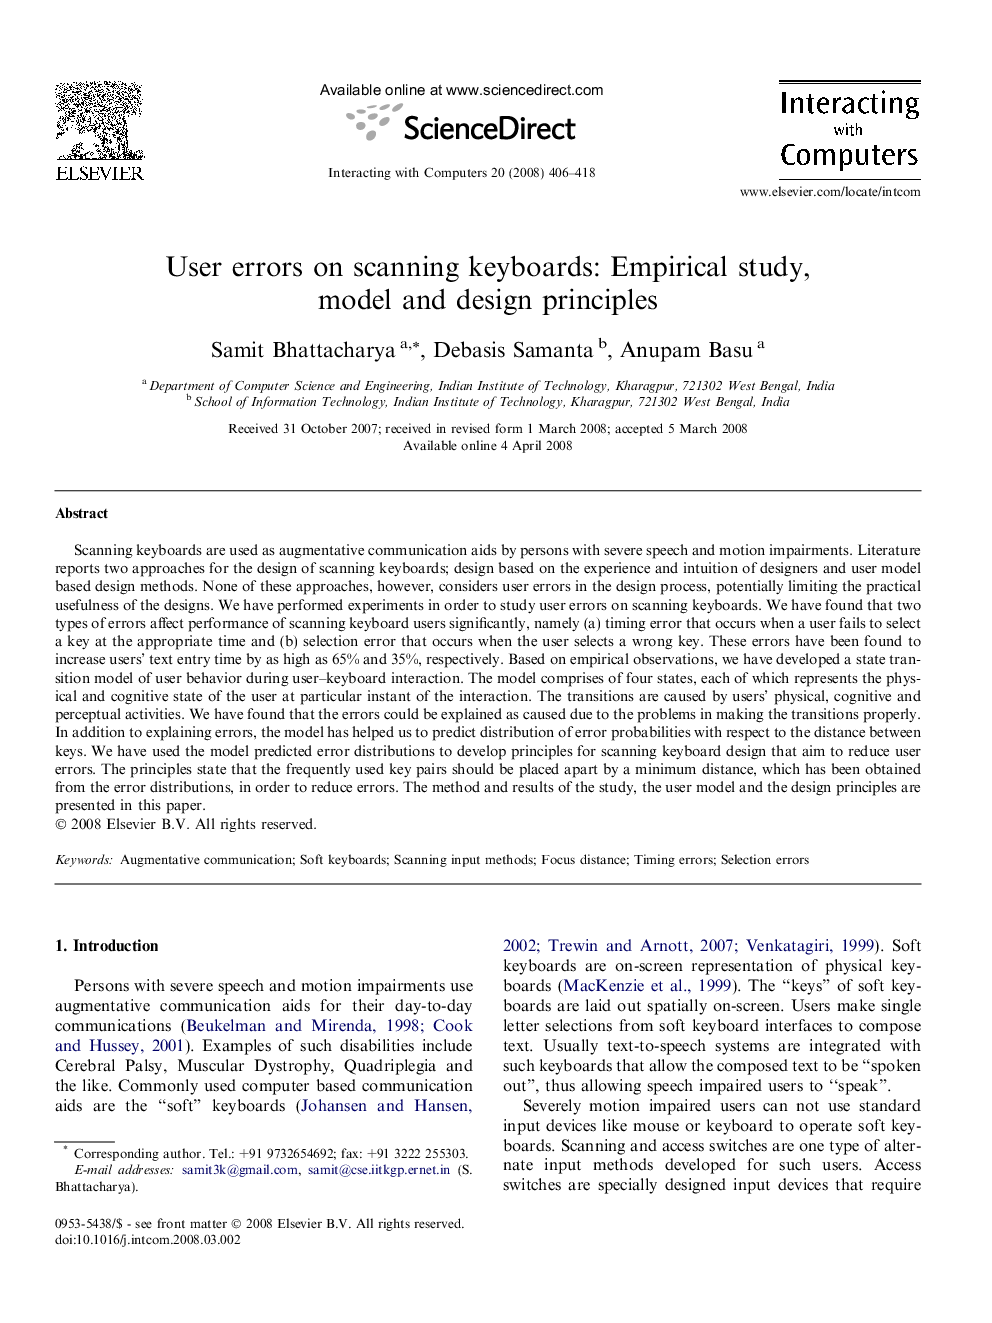 User errors on scanning keyboards: Empirical study, model and design principles